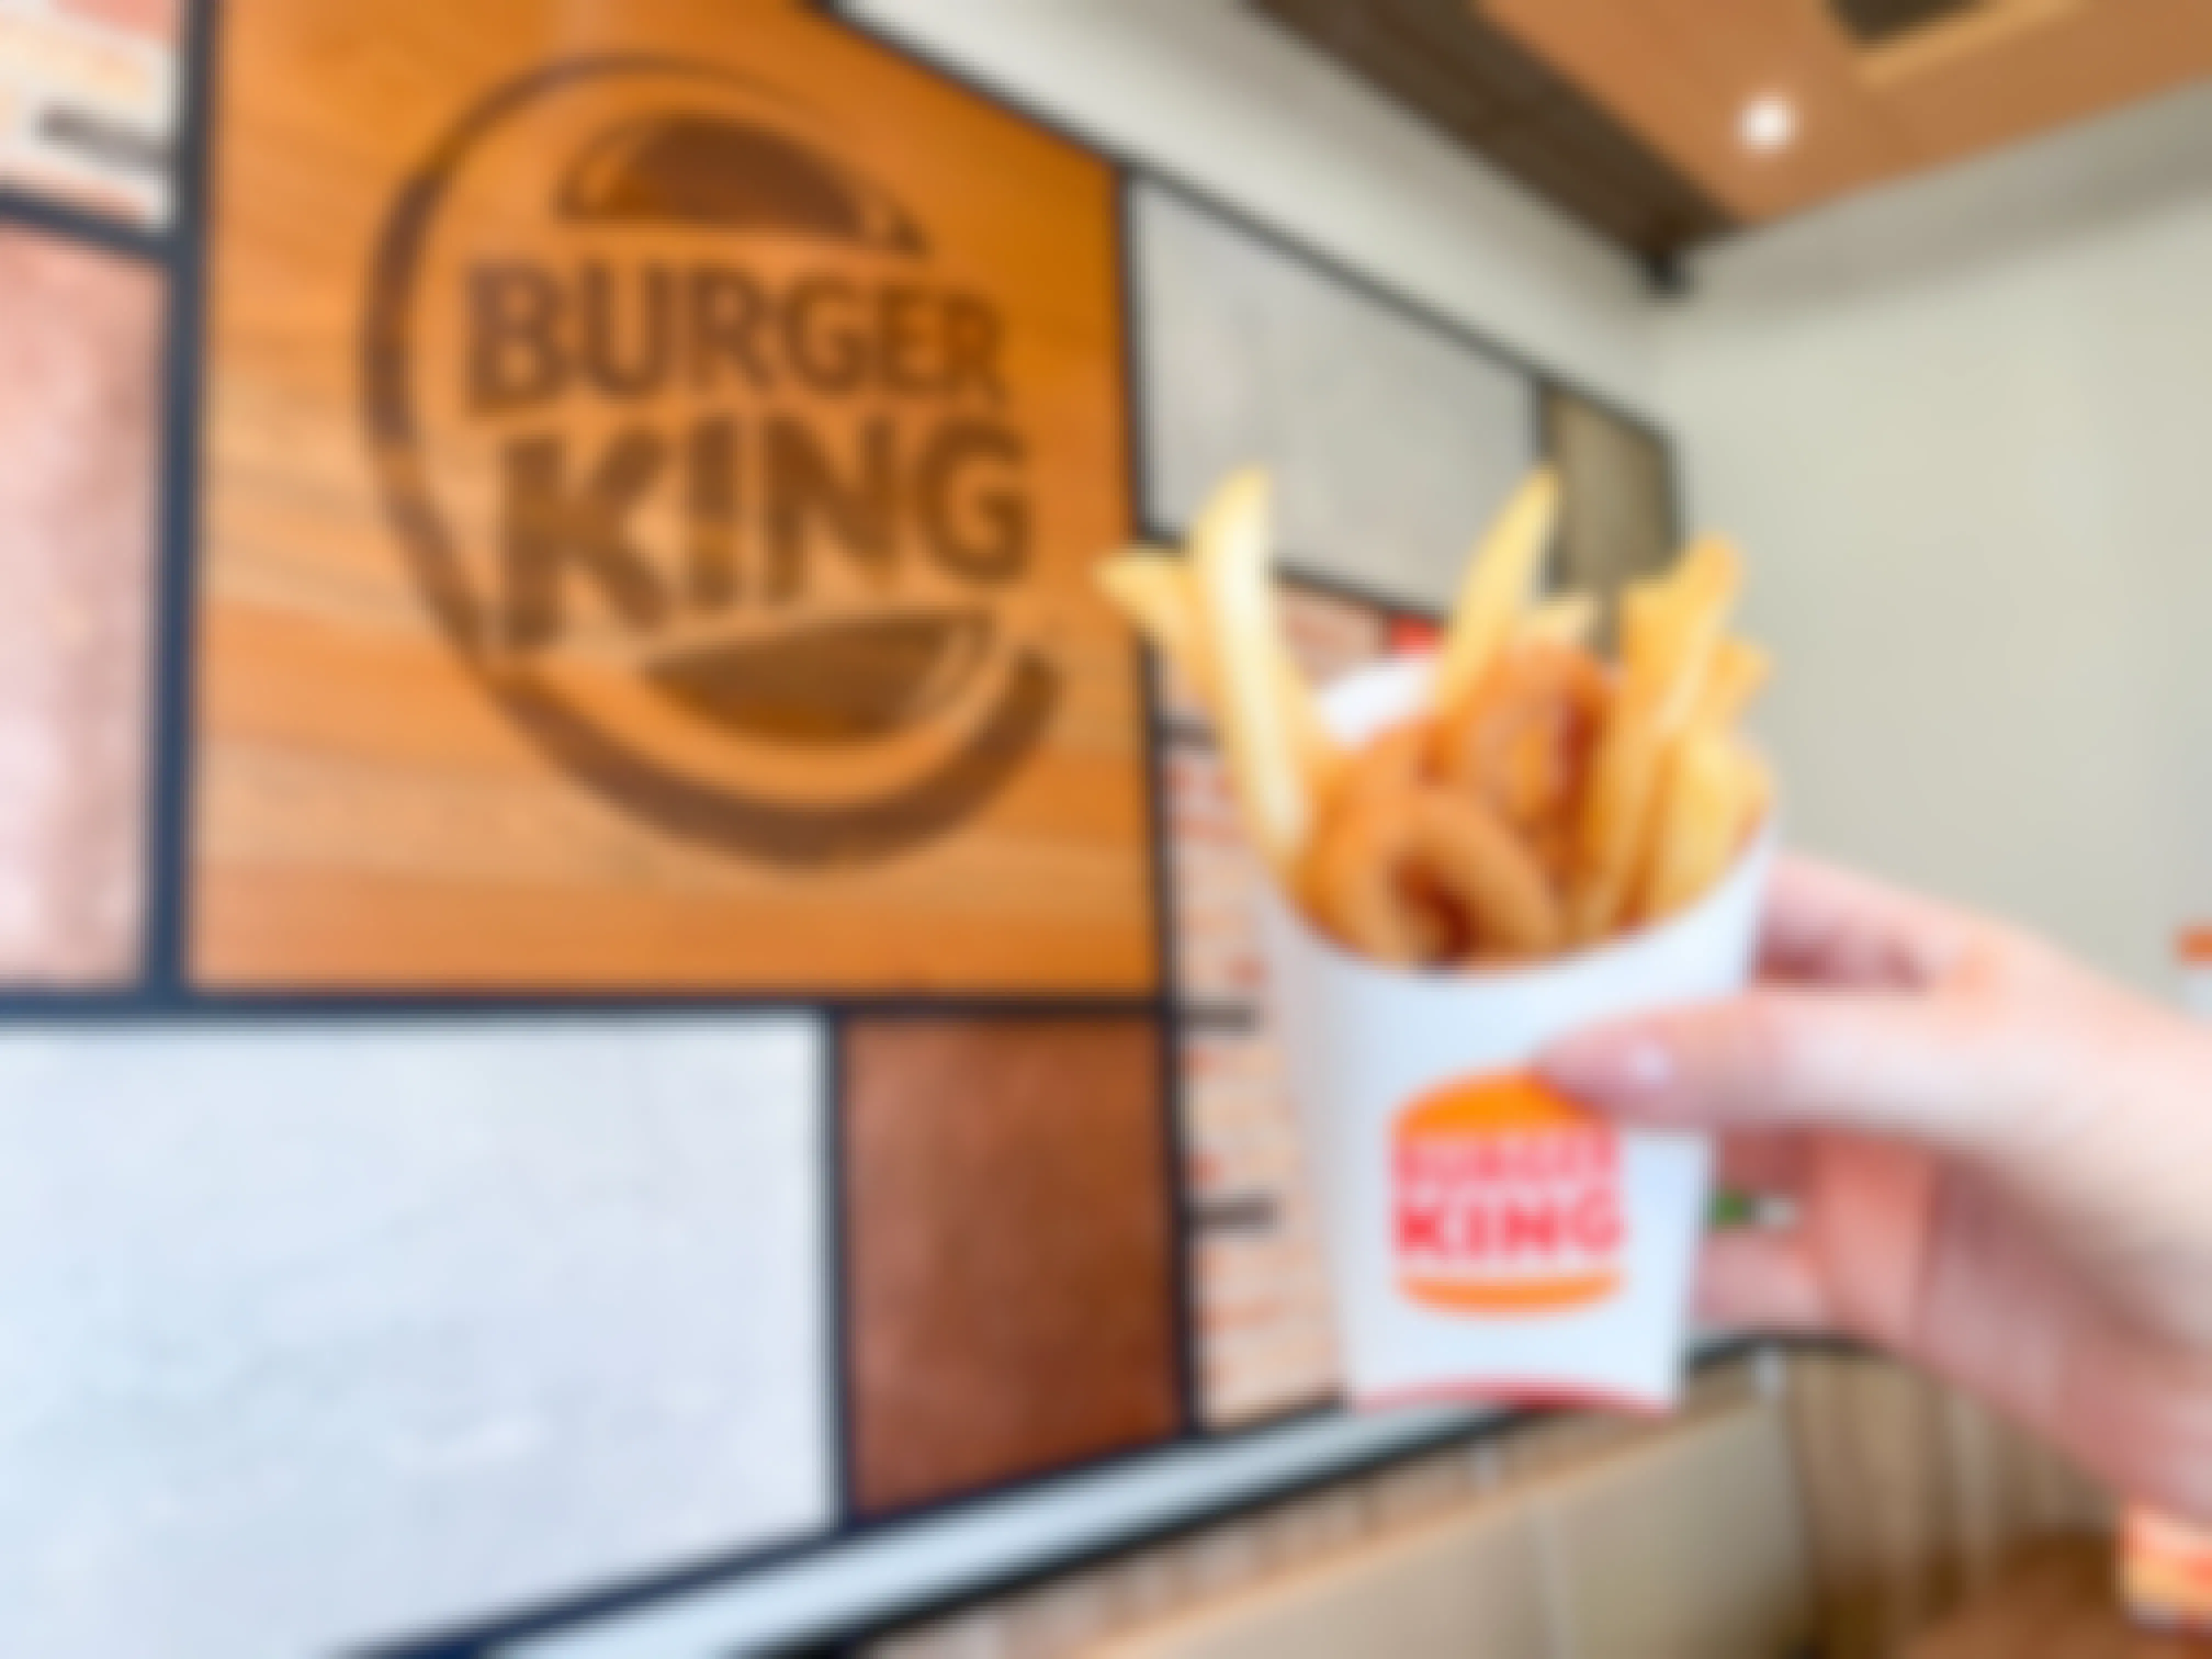 burger king frings a mix of fries and onion rings being held up inside burger king